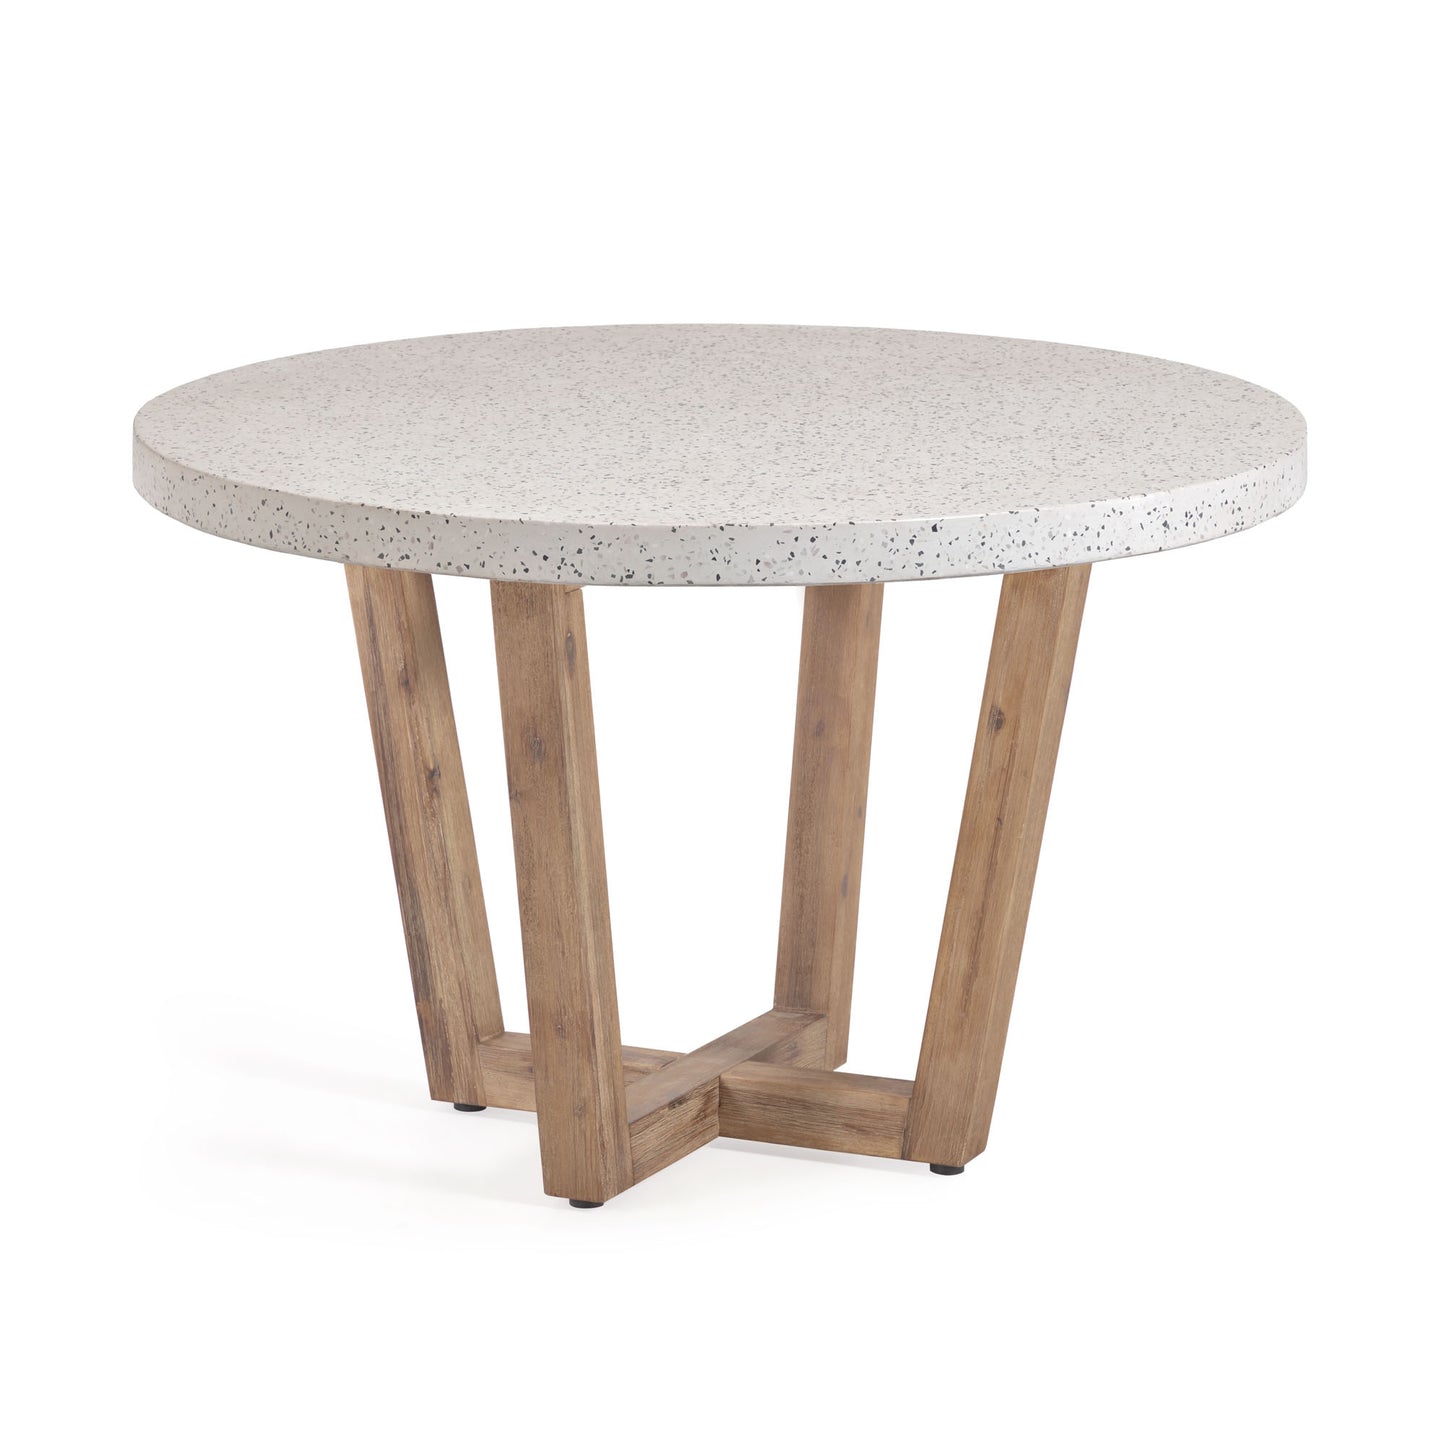 Shanelle Outdoor Dining Table